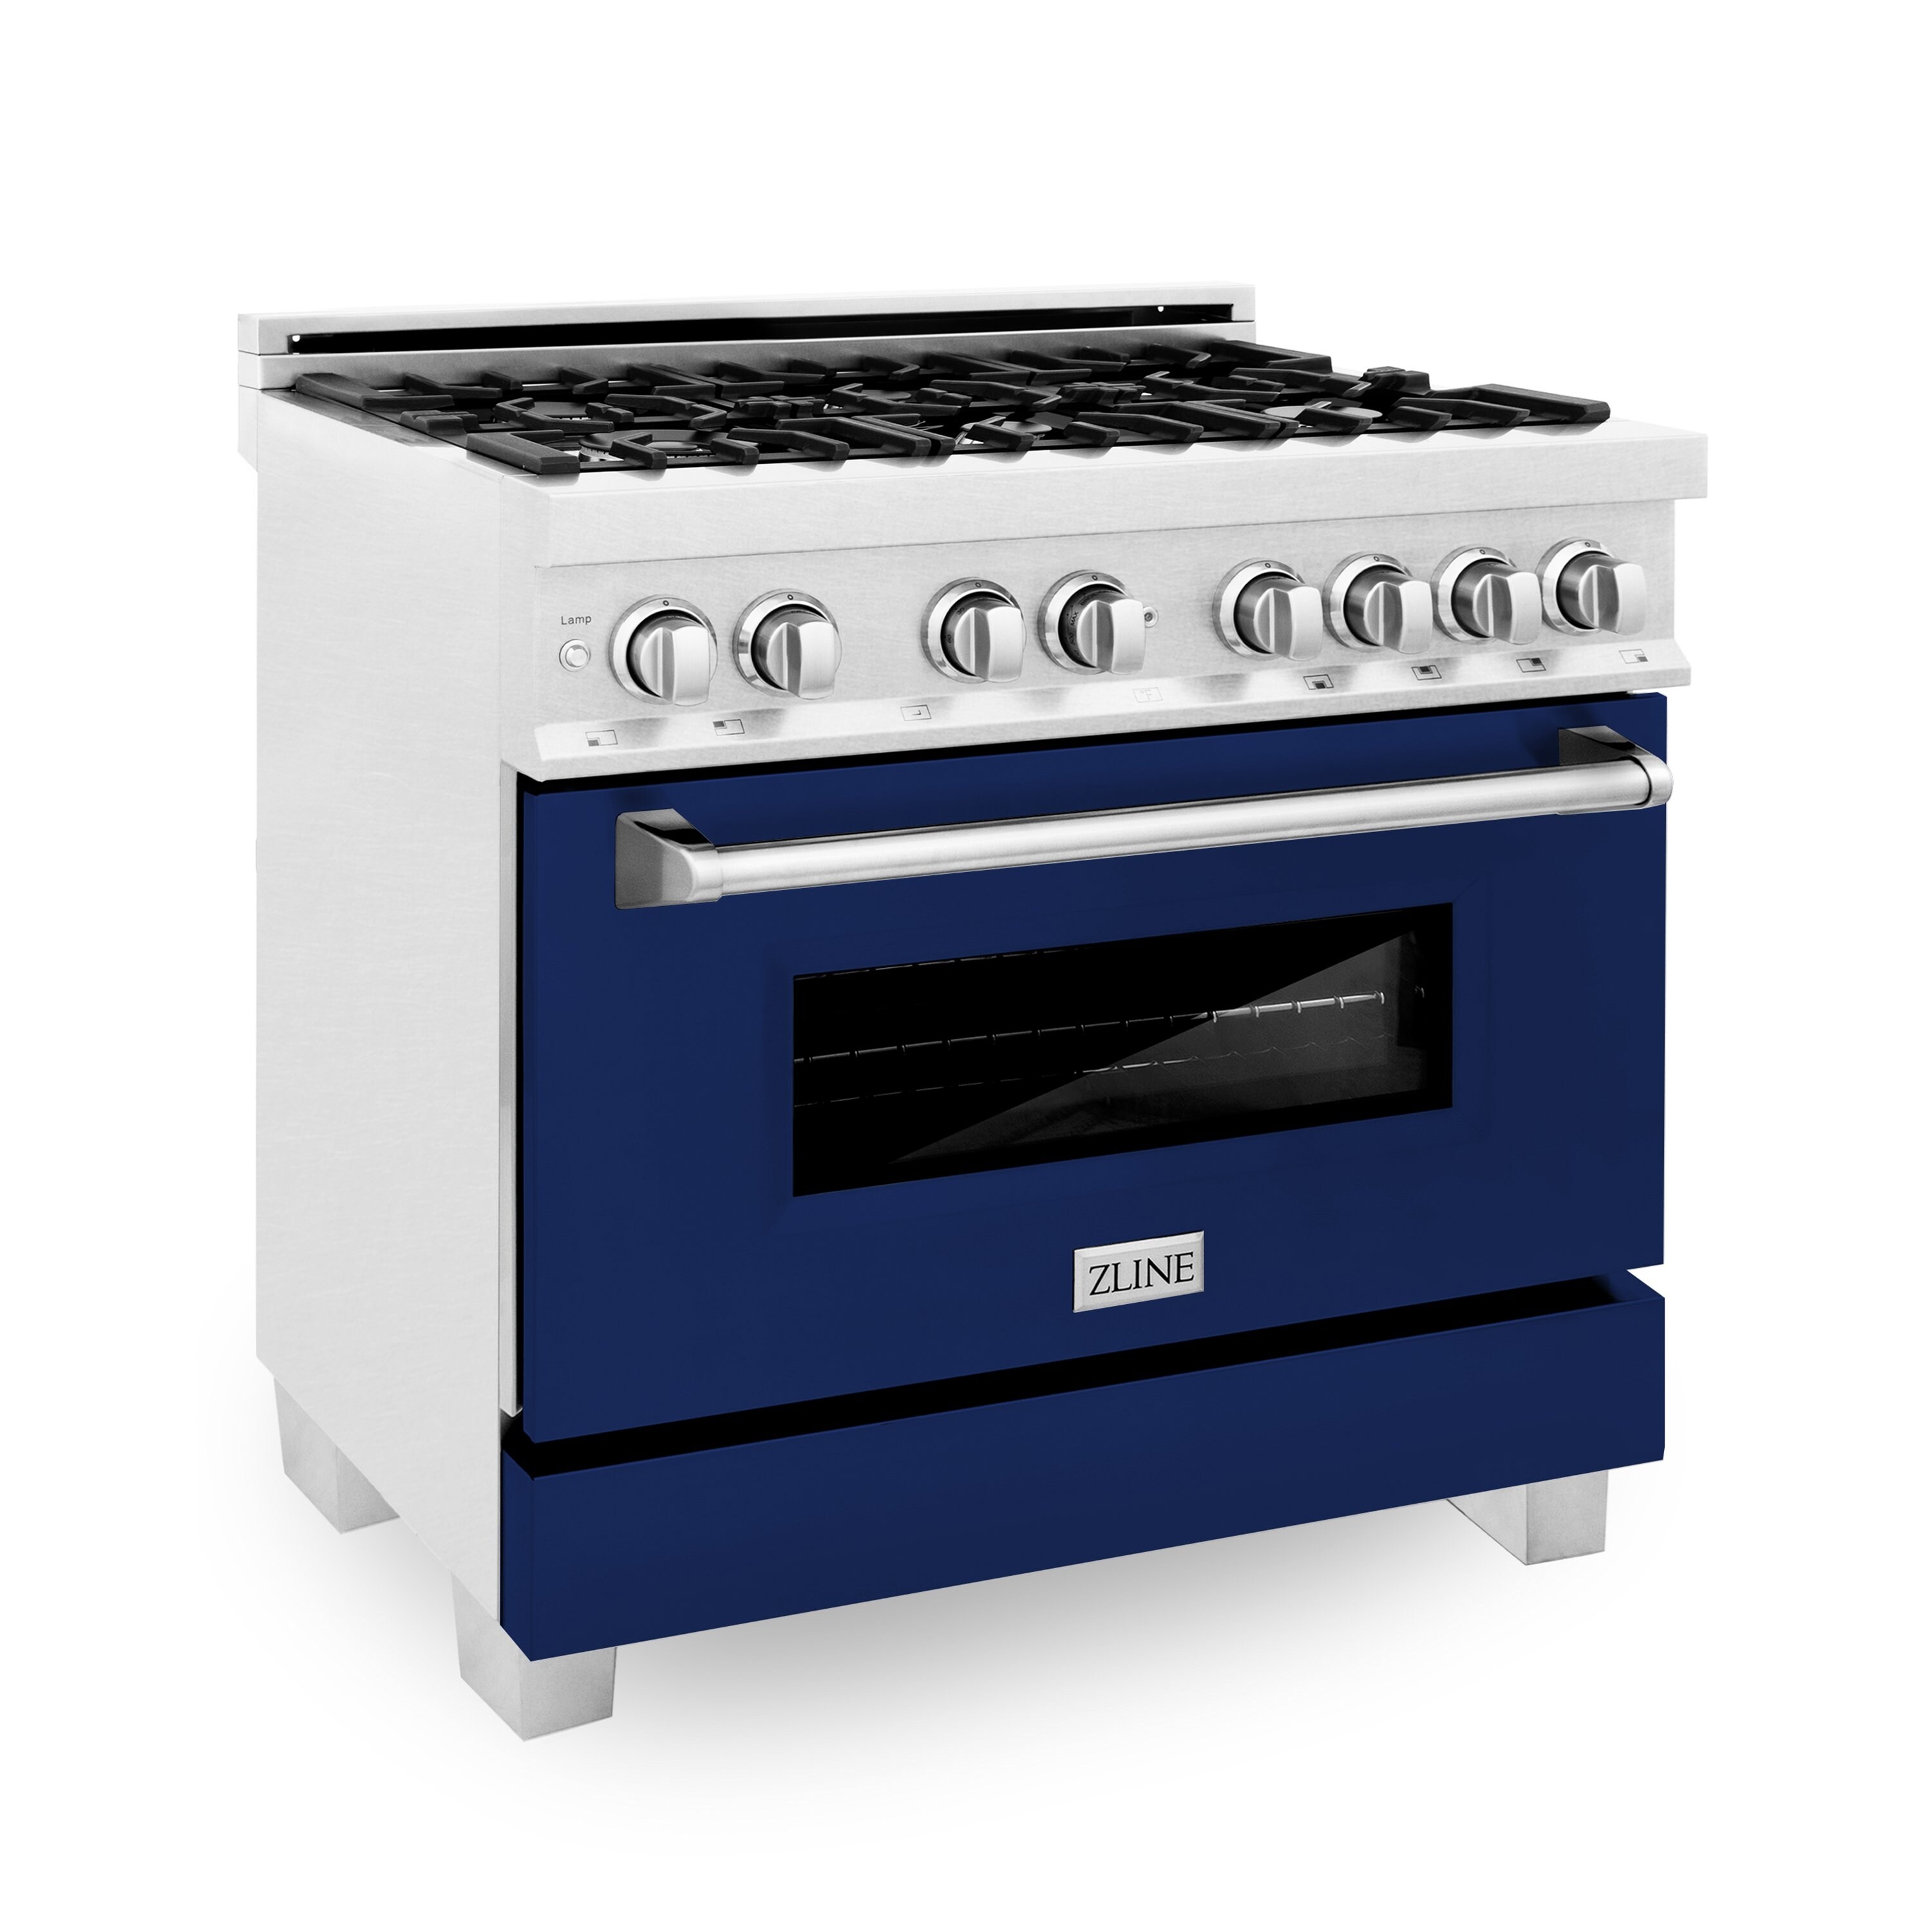 Zline Kitchen and Bath ZLINE 36" 4.6 cu. ft. Dual Fuel Range with Gas Stove and Electric Oven in in Fingerprint Resistant Stainless Steel